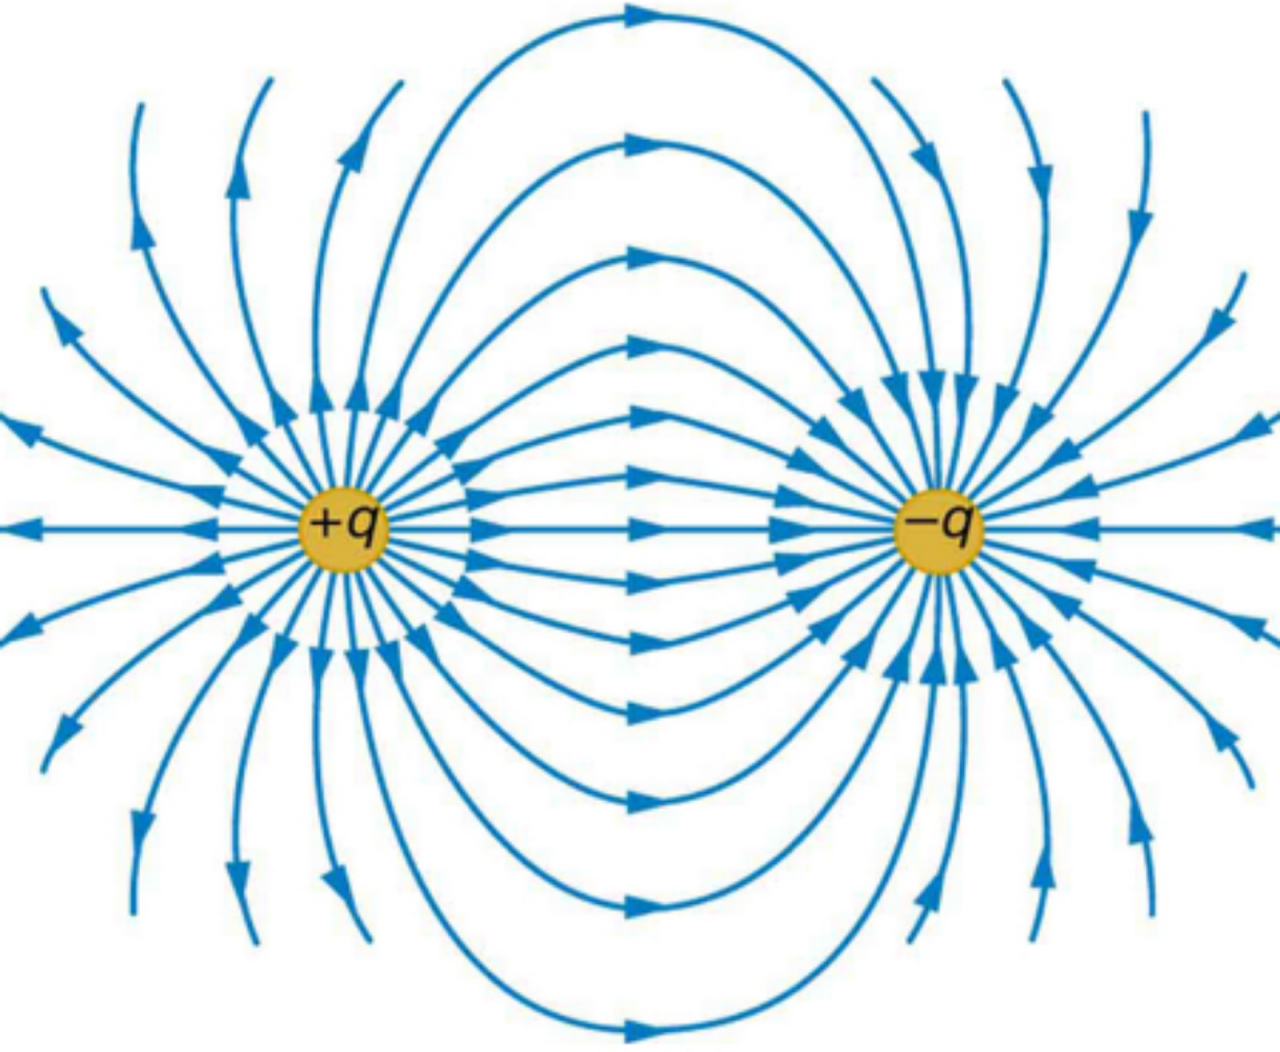 An electric field of